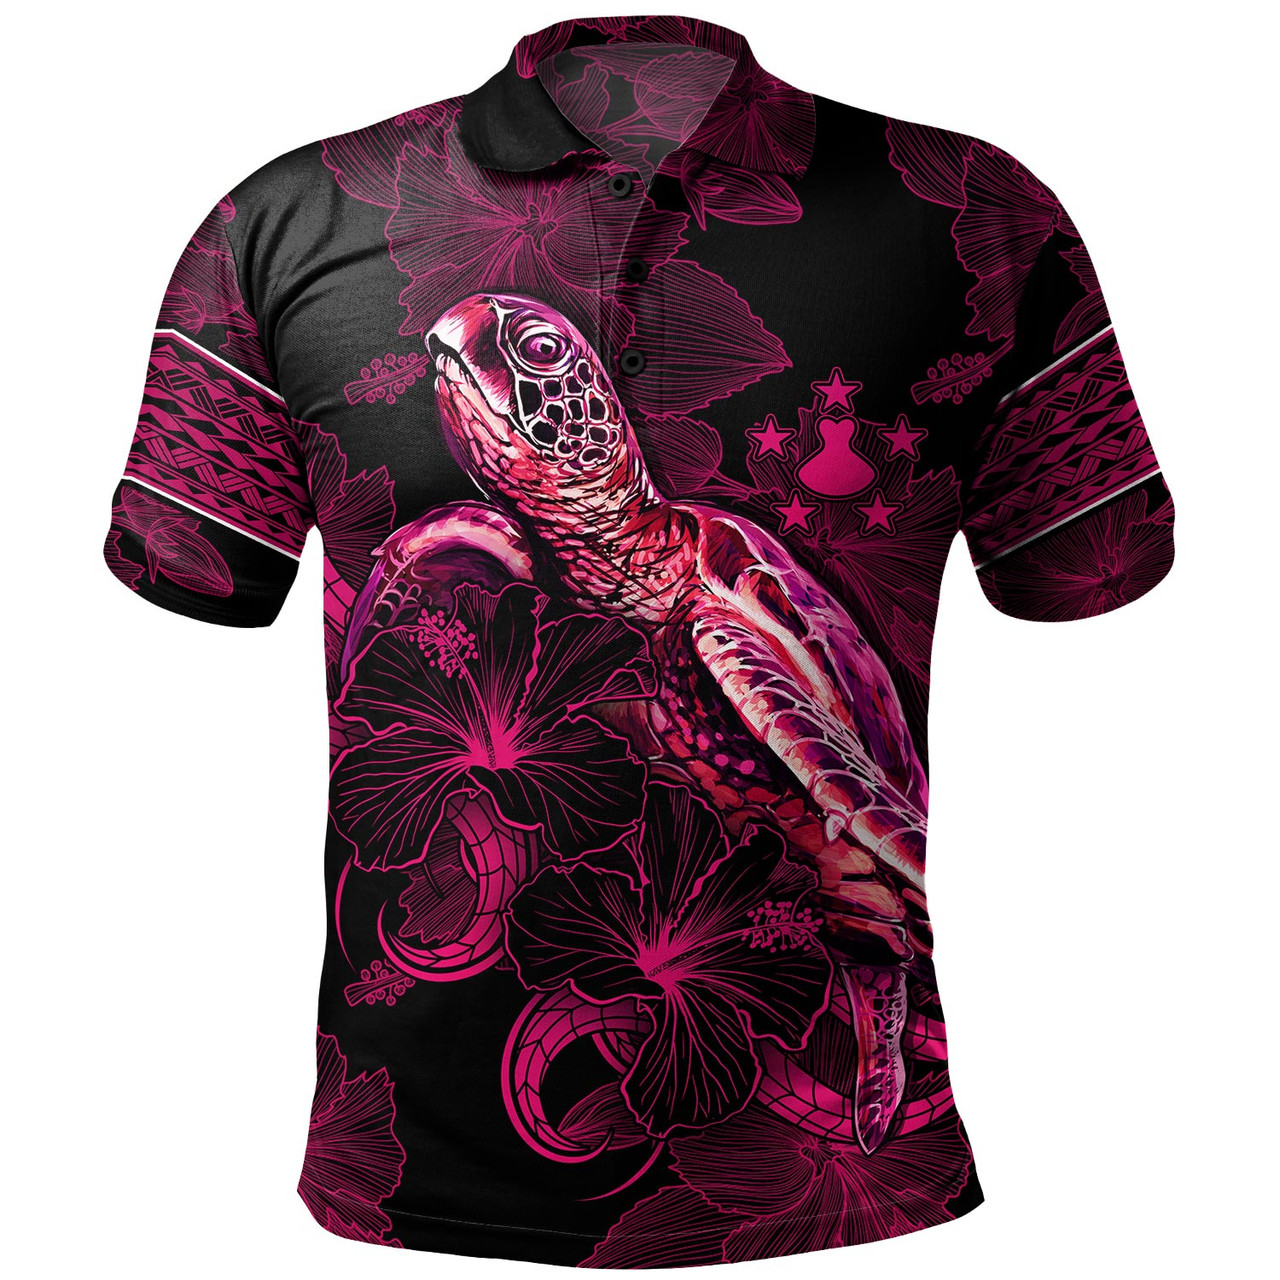 Austral Islands Polo Shirt Sea Turtle With Blooming Hibiscus Flowers Tribal Maroon